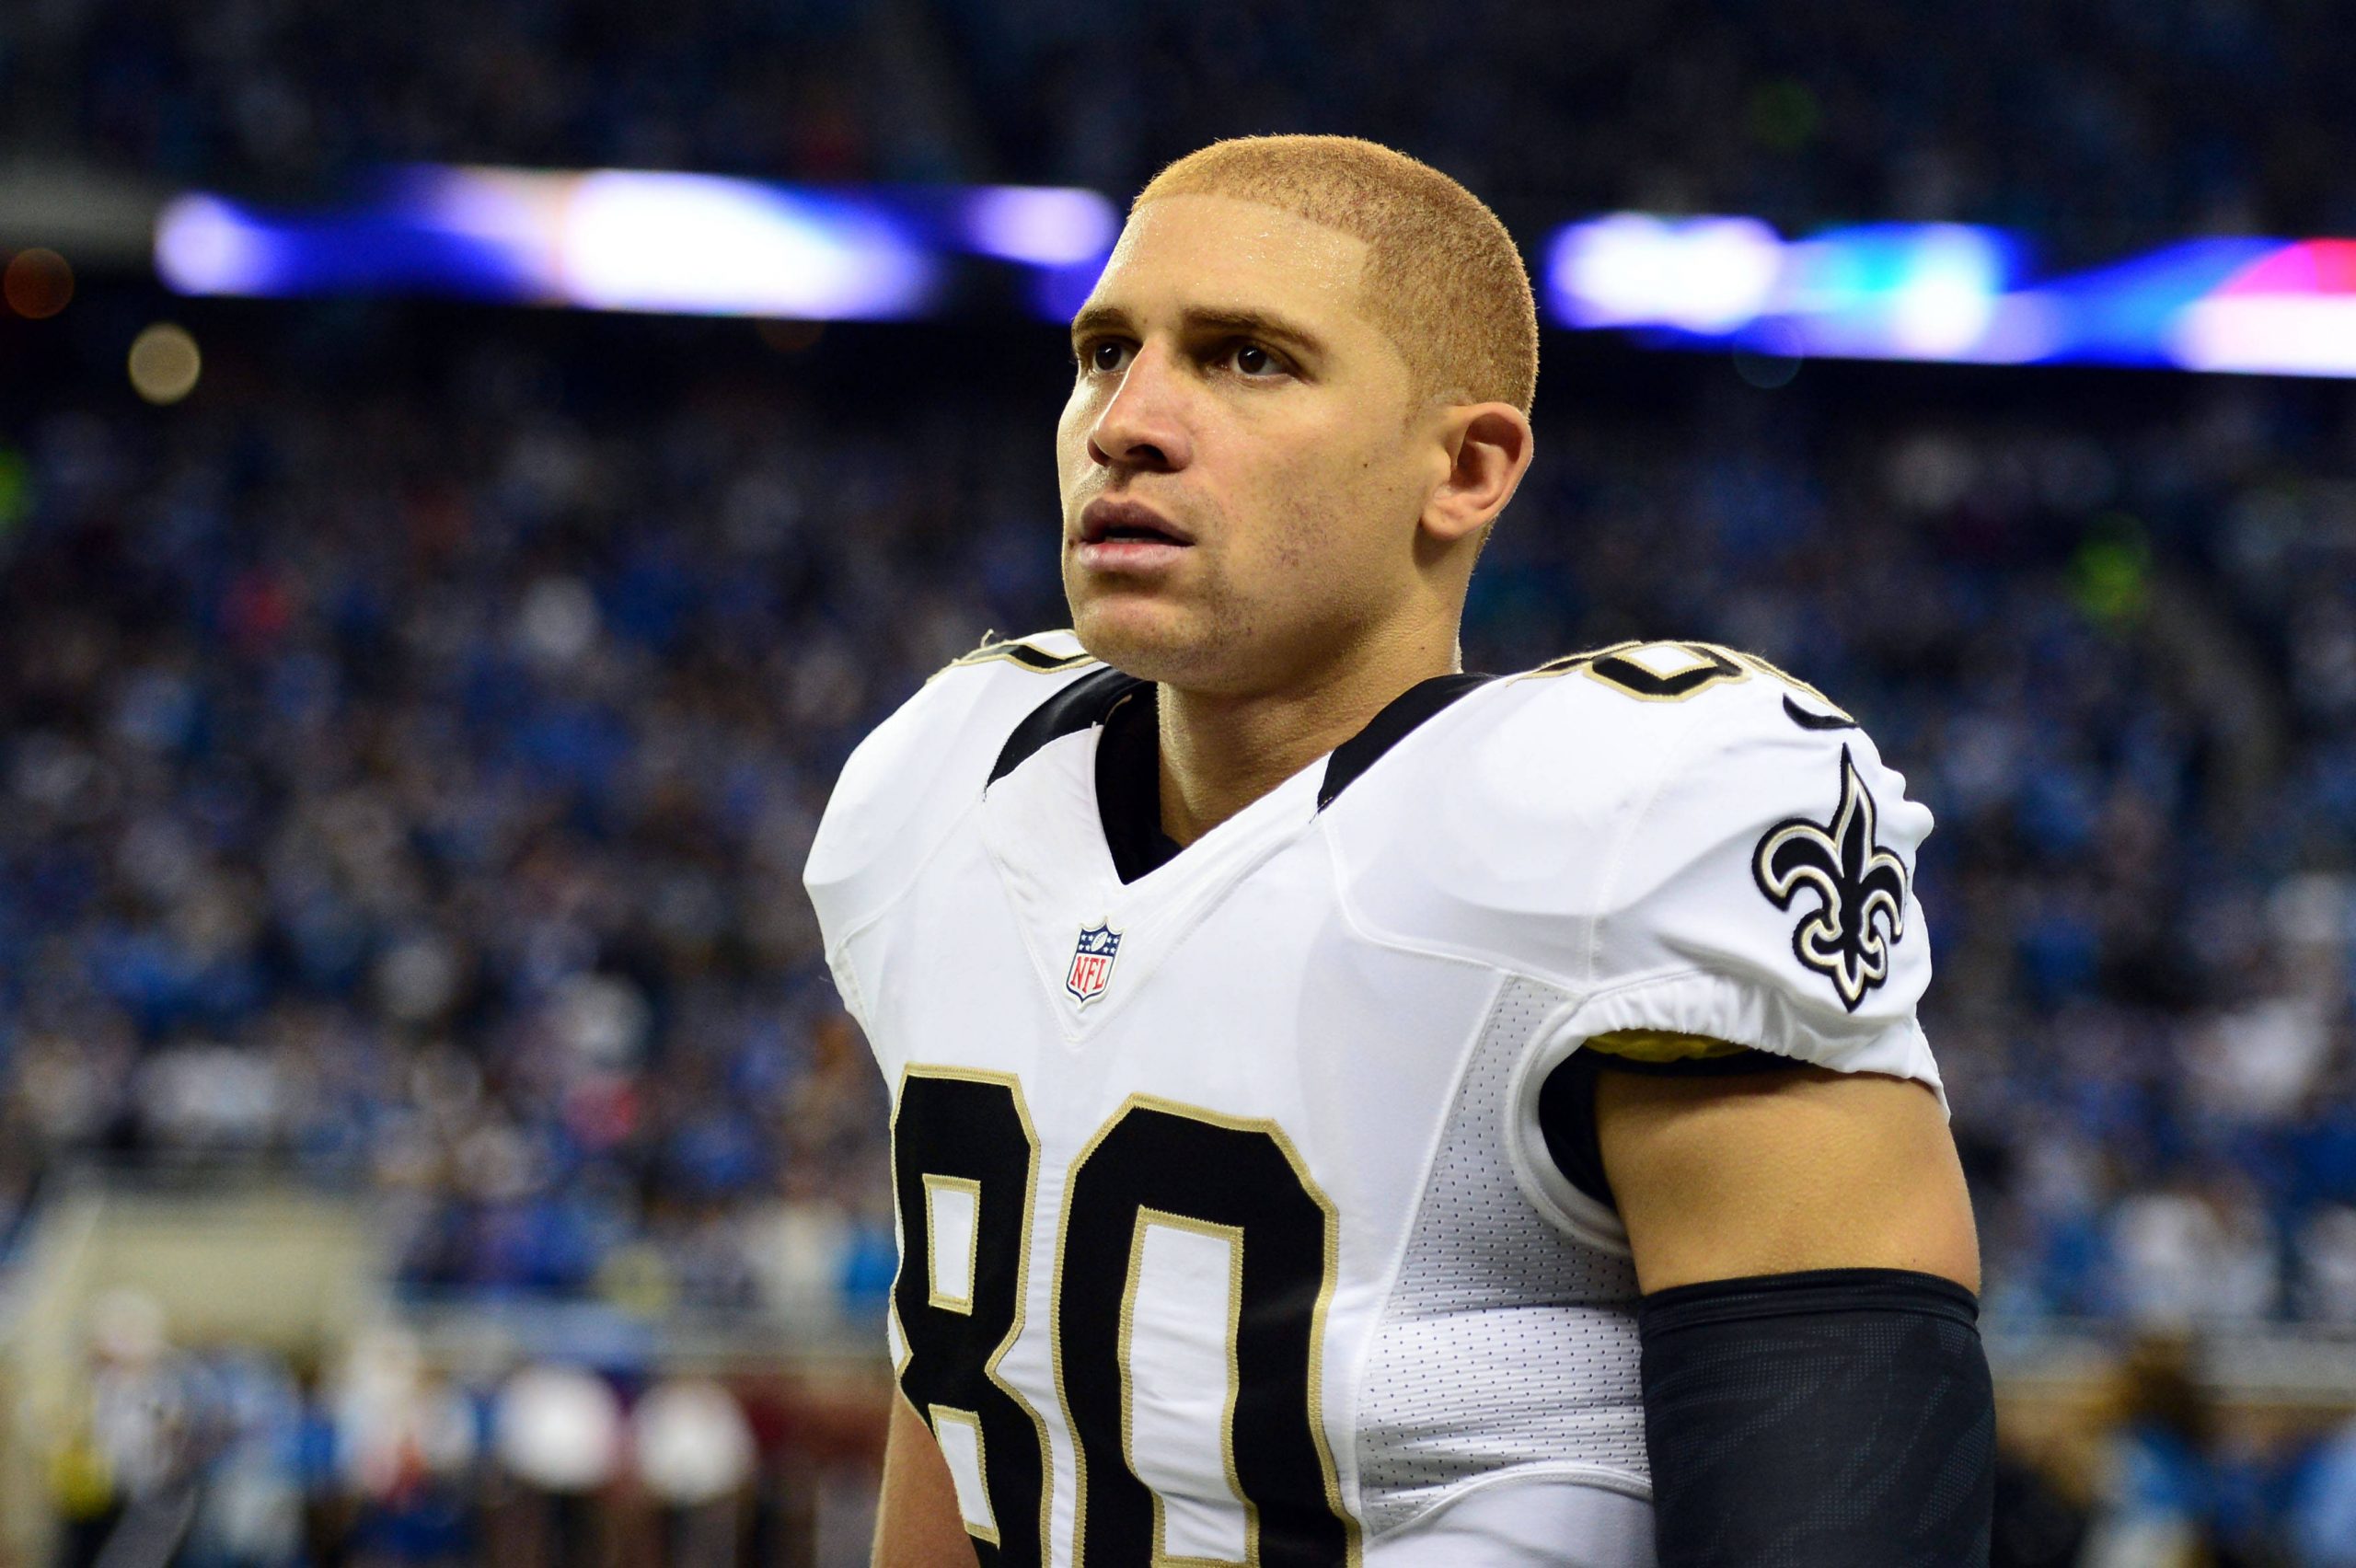 NFL, American Football Herren, USA New Orleans Saints at Detroit Lions Oct 19, 2014 Detroit, MI, USA New Orleans Saints tight end Jimmy Graham 80 on the sidelines during the first quarter against the Detroit Lions at Ford Field. Detroit MI USA, EDITORIAL USE ONLY PUBLICATIONxINxGERxSUIxAUTxONLY Copyright: xAndrewxWeberx 8151627